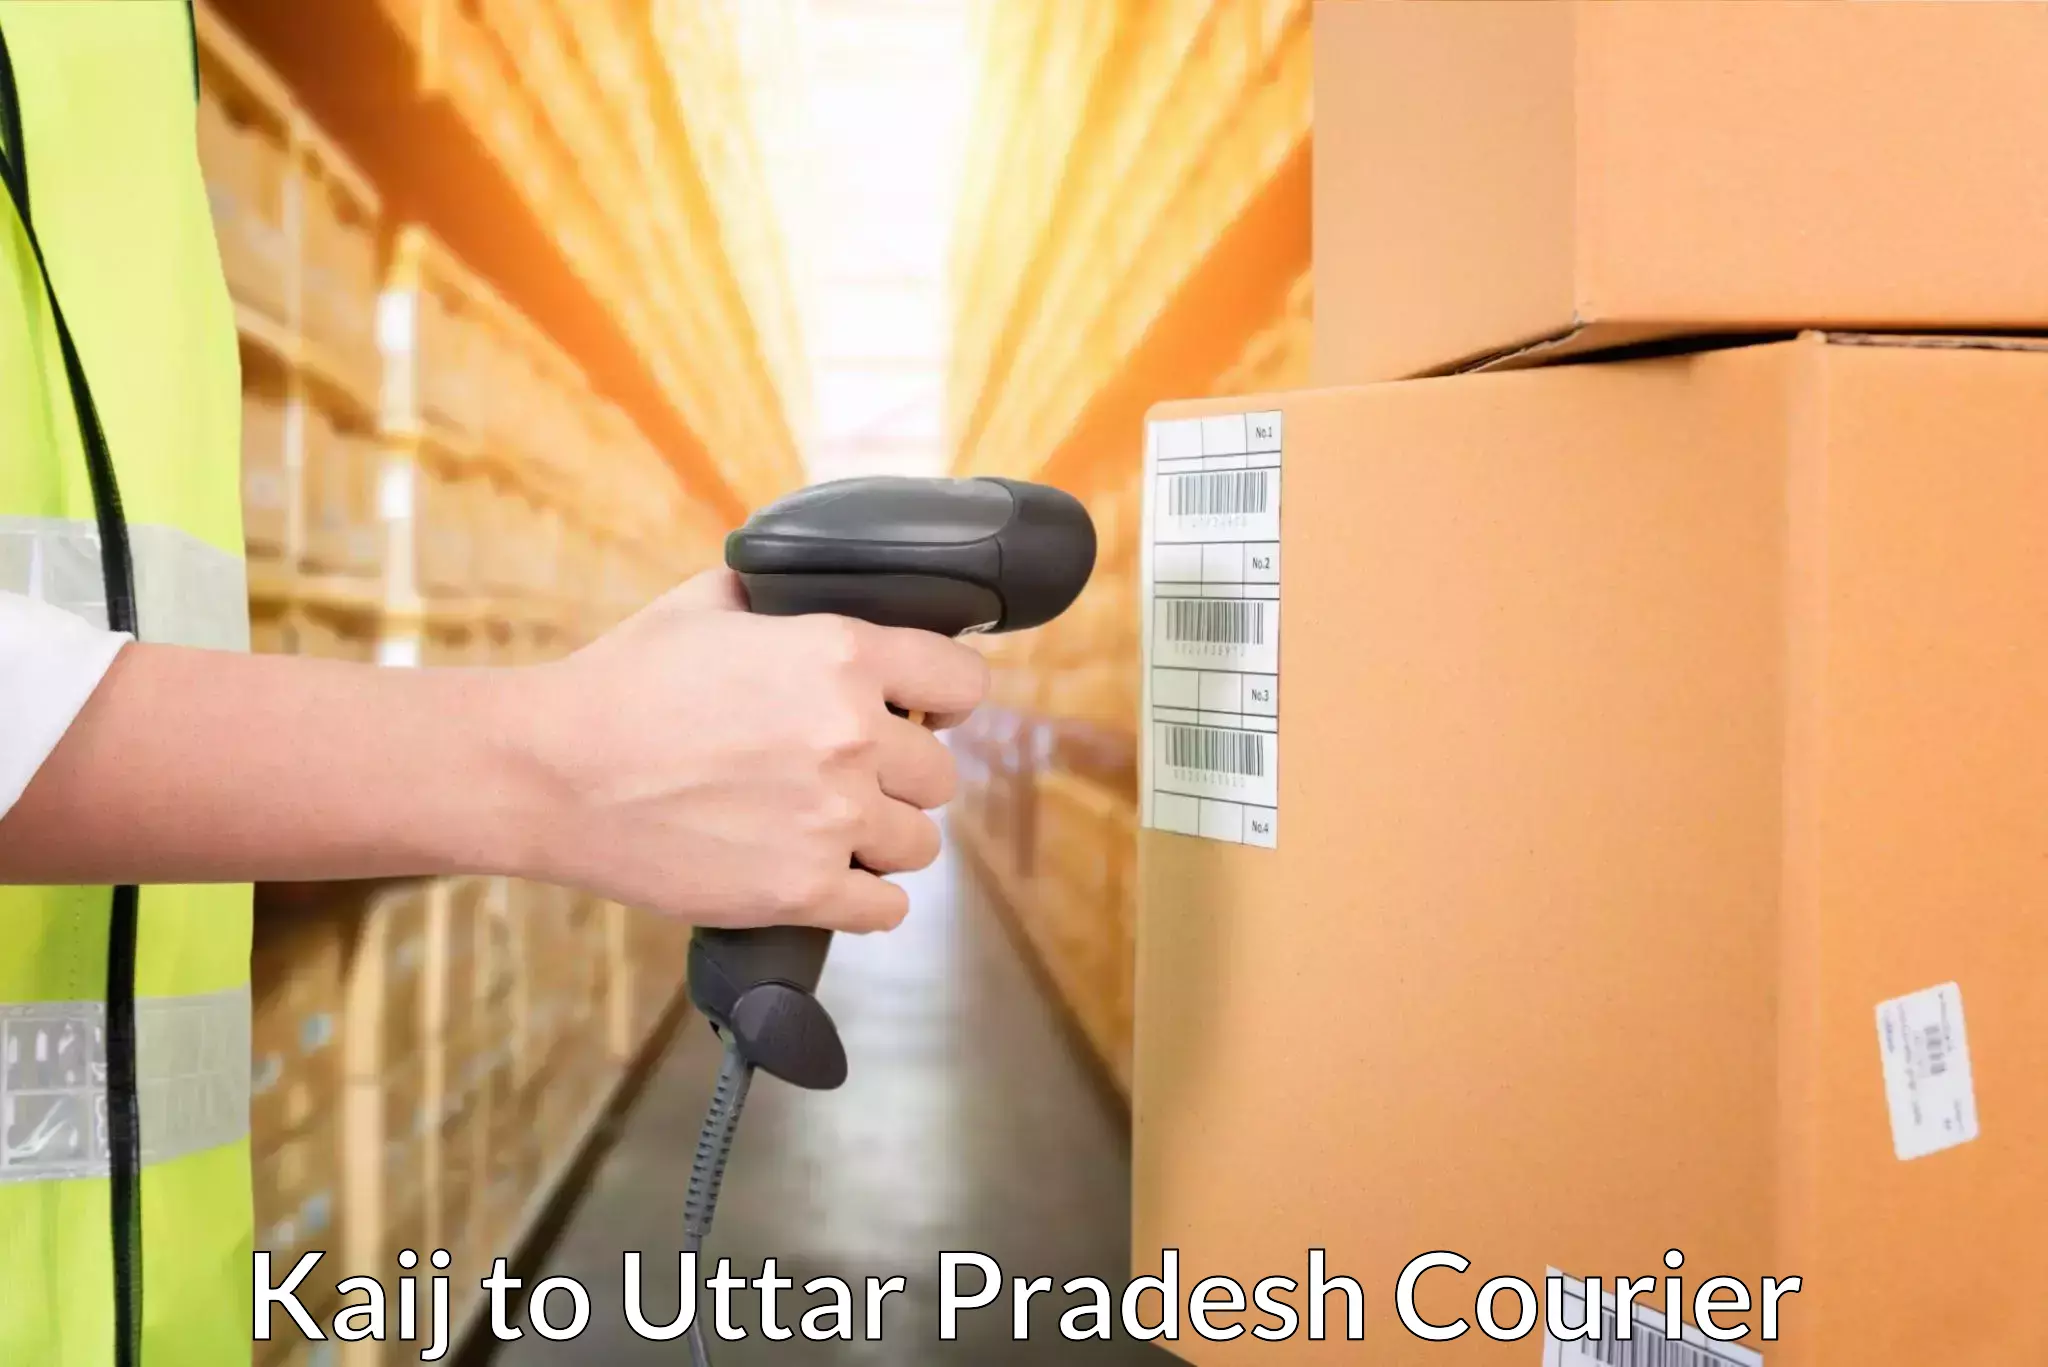 Package delivery network Kaij to Uttar Pradesh